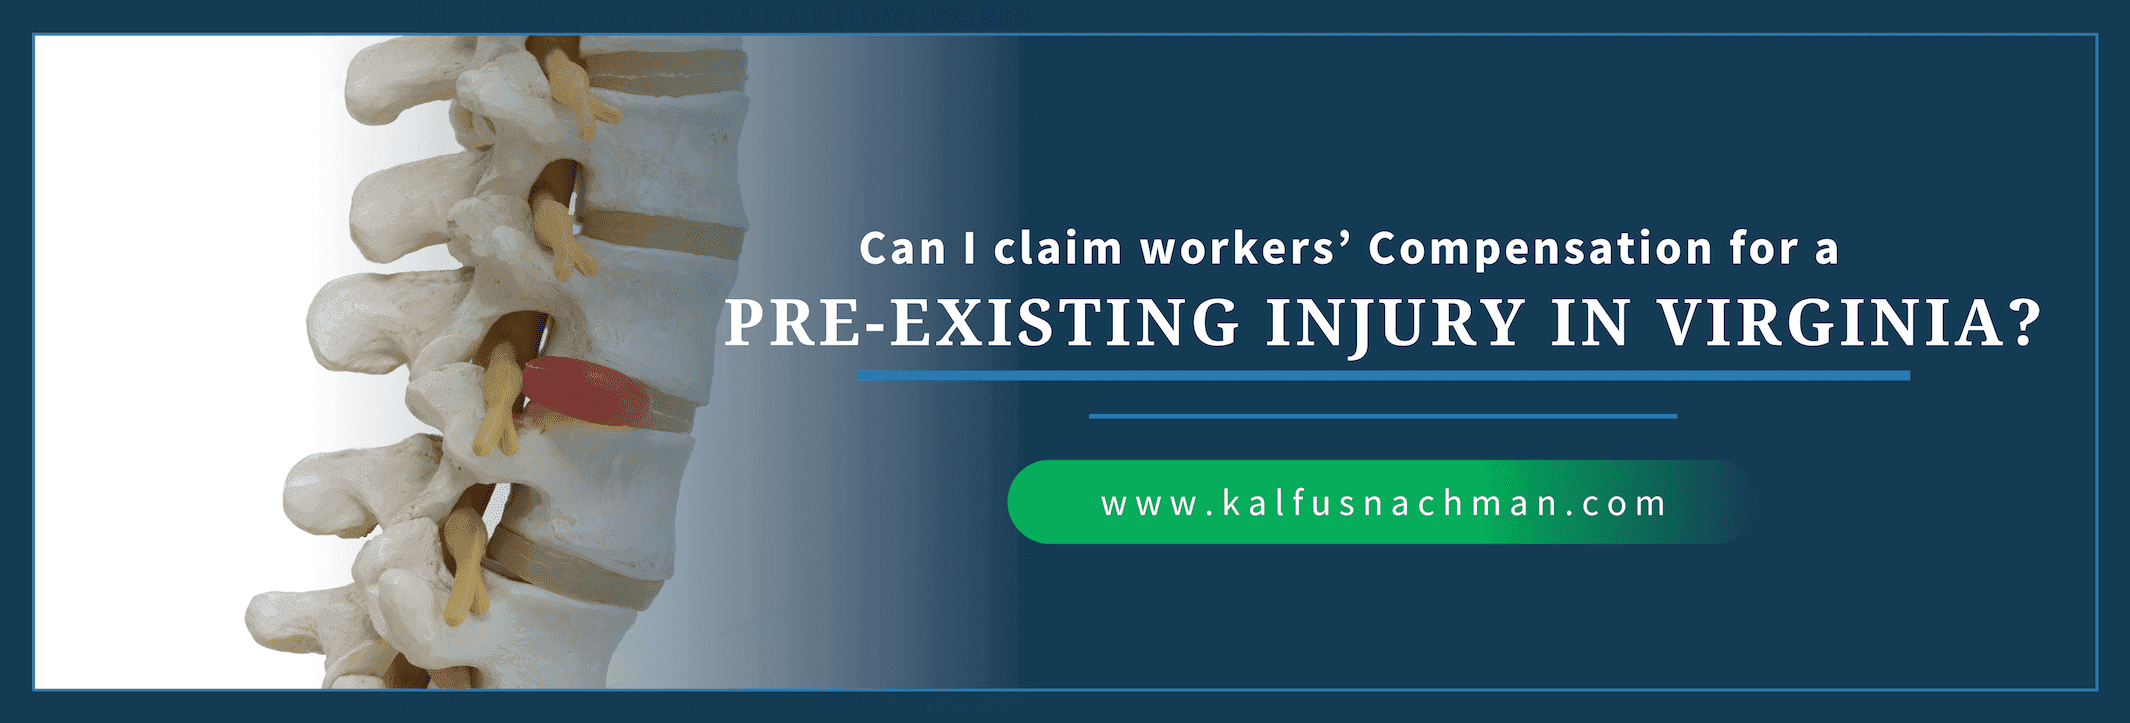 Can I Claim Workers' Compensation For A Pre-Existing Injury in Virginia?